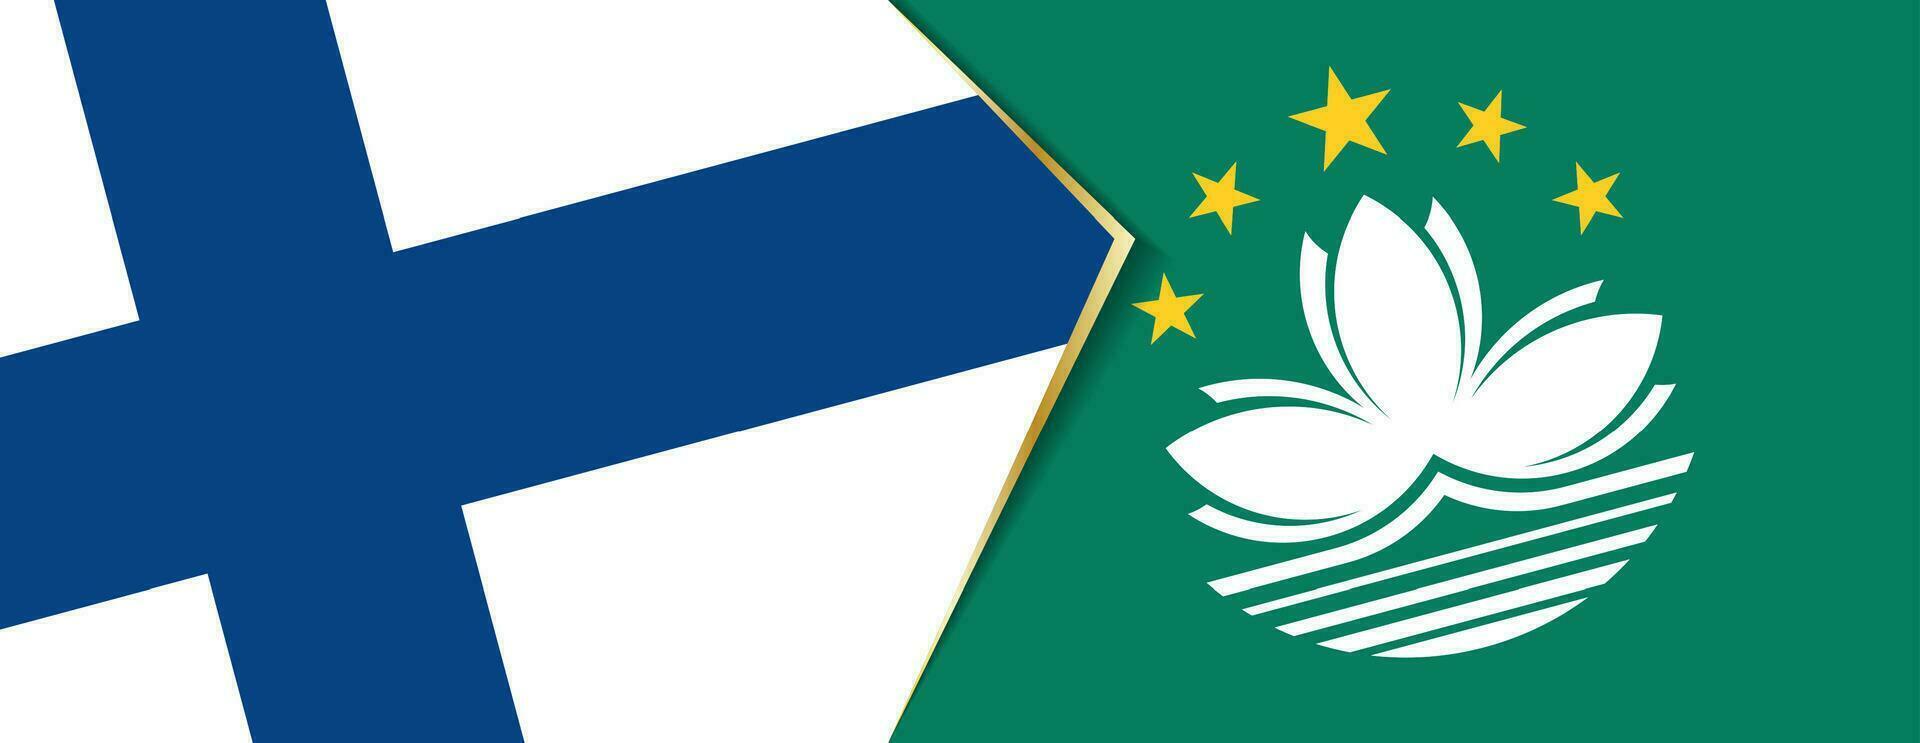 Finland and Macau flags, two vector flags.